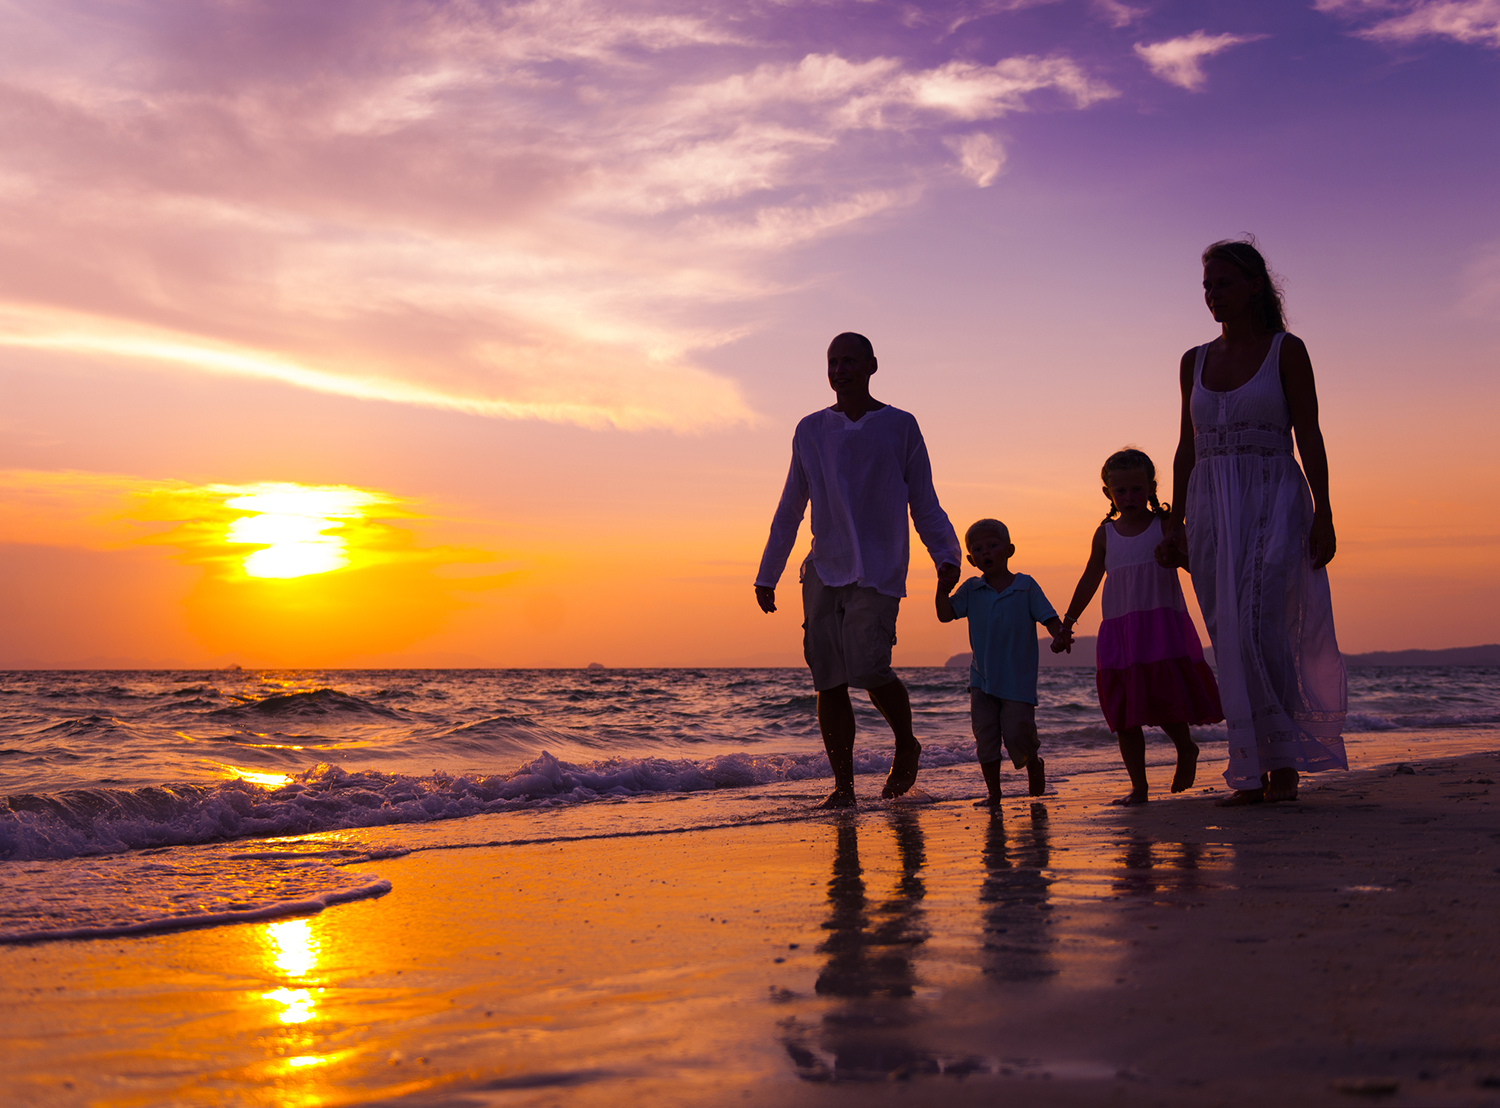 Mother, father, daughter and son share a bonding experience while walking along the oceanside at sunset holding hands.